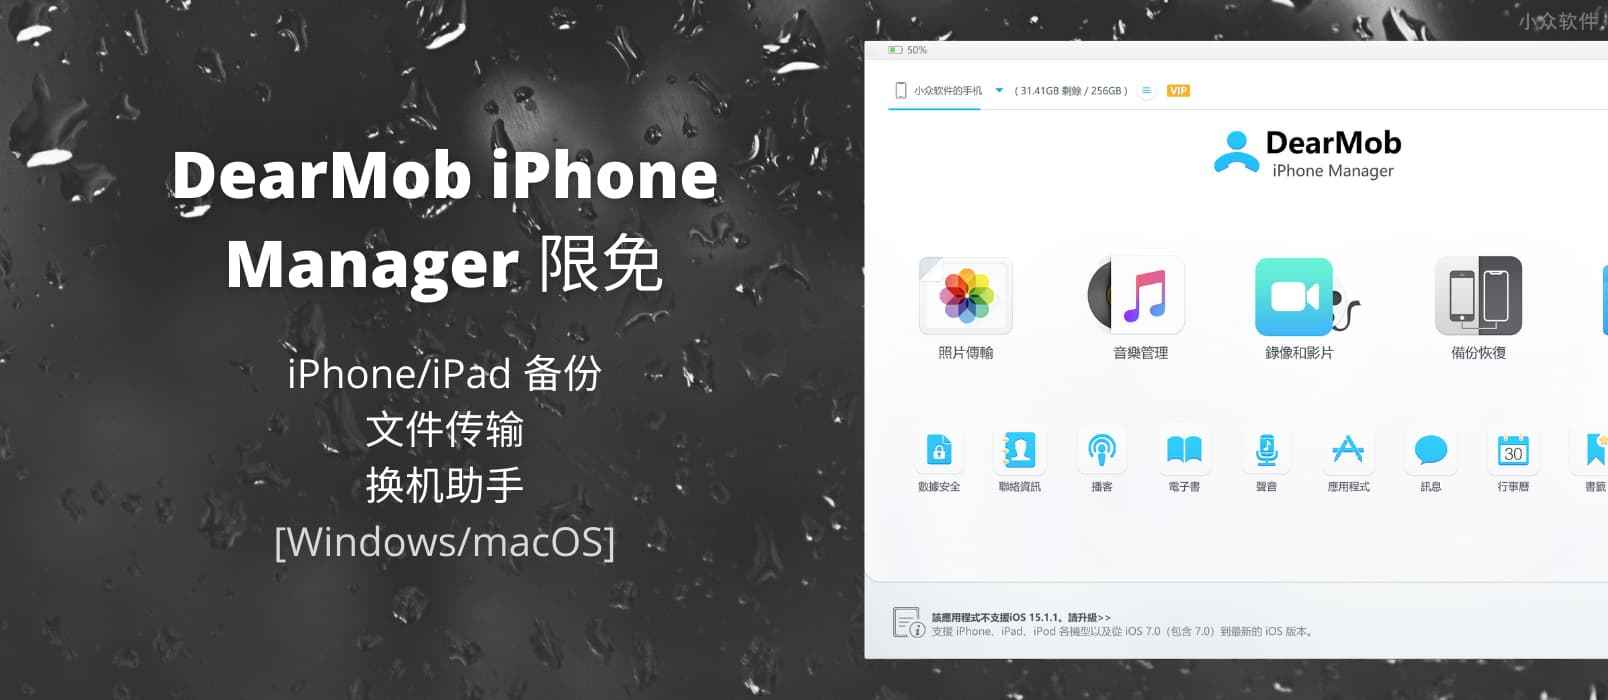 DearMob iPhone Manager 限免：iPhone/iPad 备份、文件传输、应用安装、换机助手，是不是可以替换 iMazing？[Windows/macOS]